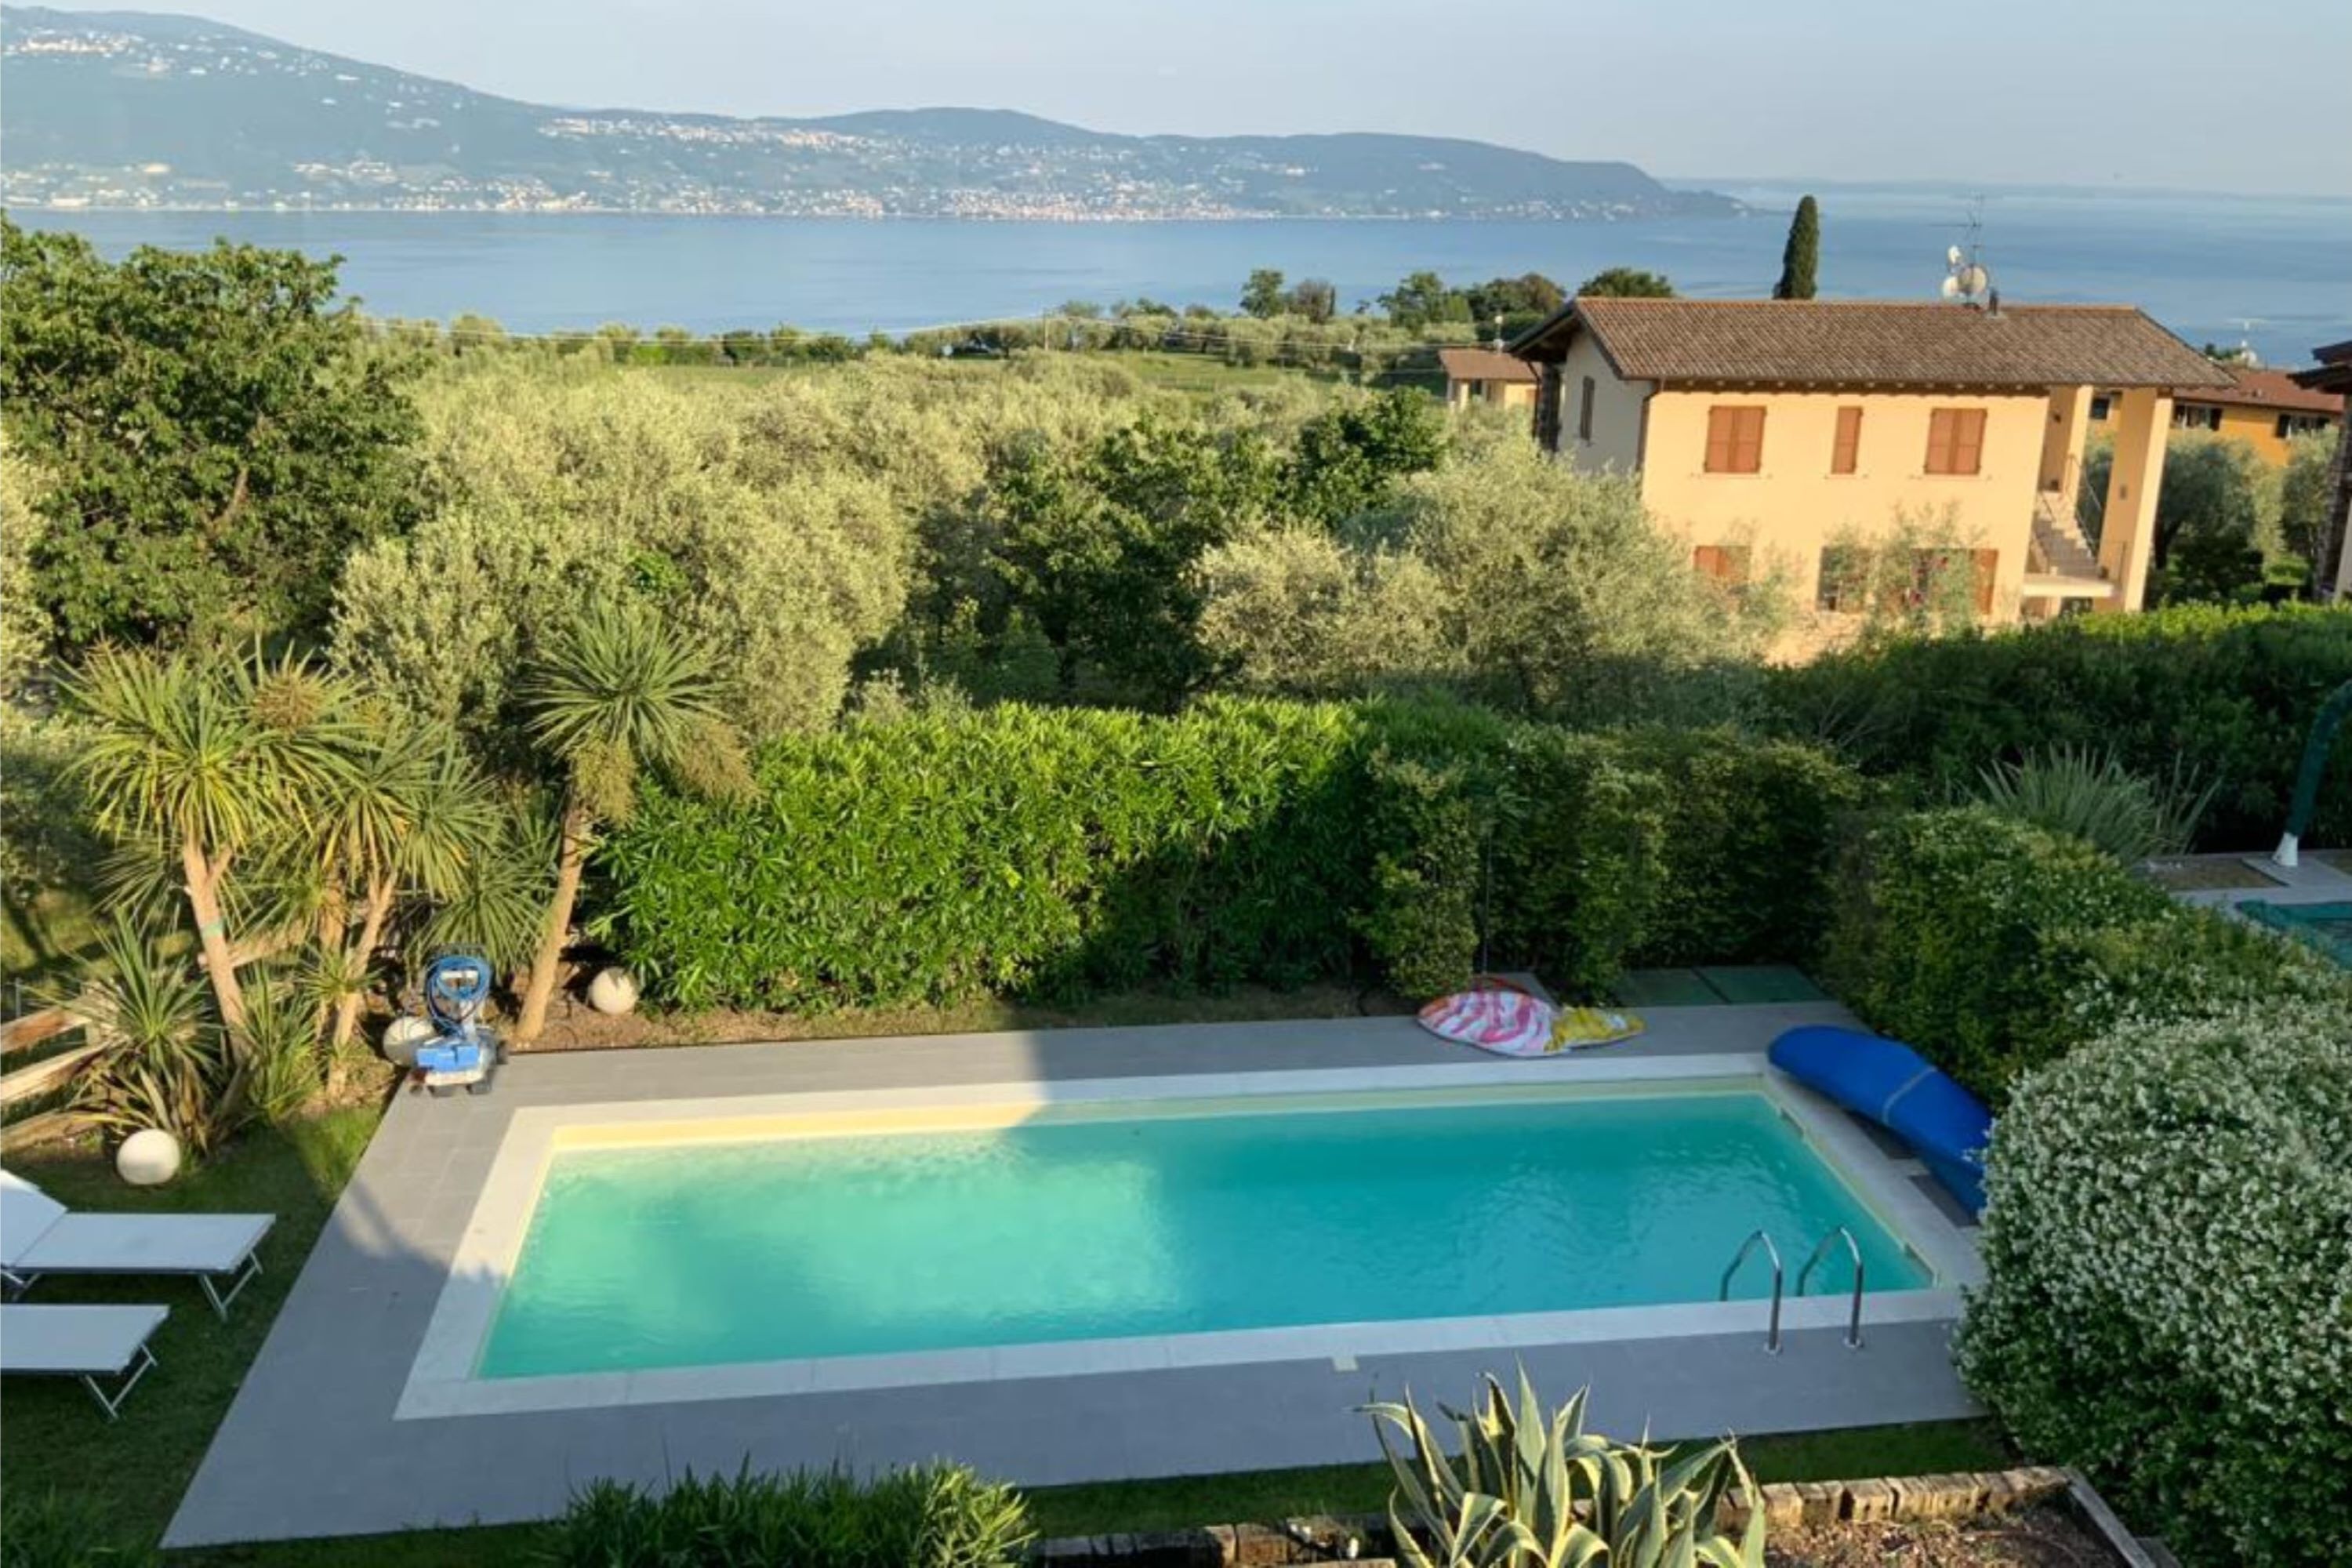 Casa Oleandri with pool and lake view - Italië - Toscolano Maderno